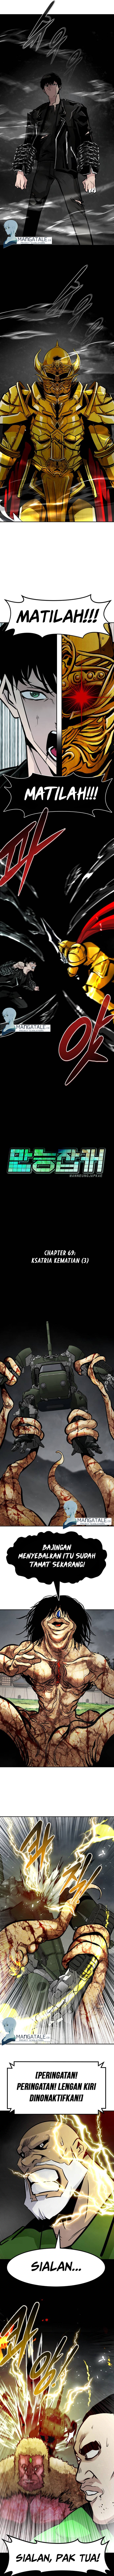 All Rounder Chapter 69 - 73